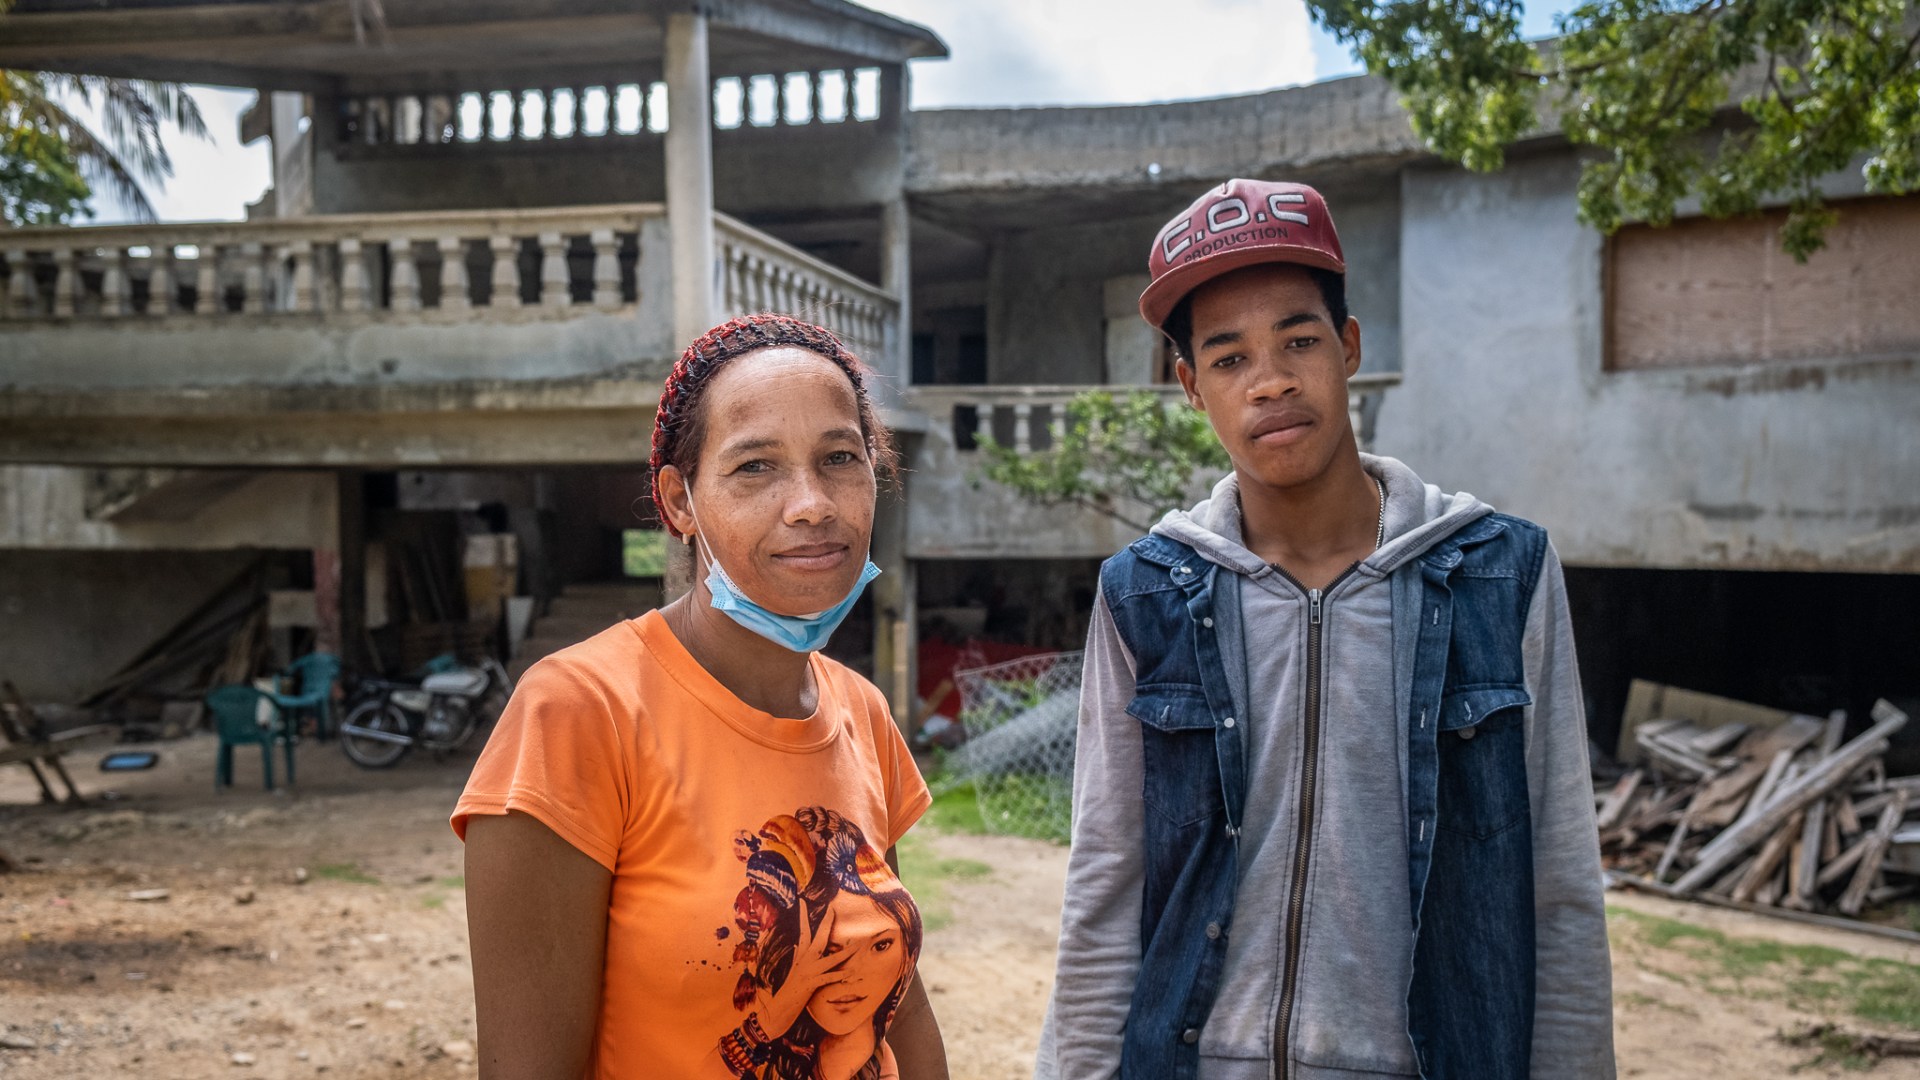 Engrid Rodriquez, a Dominican woman, stands with one of her sons